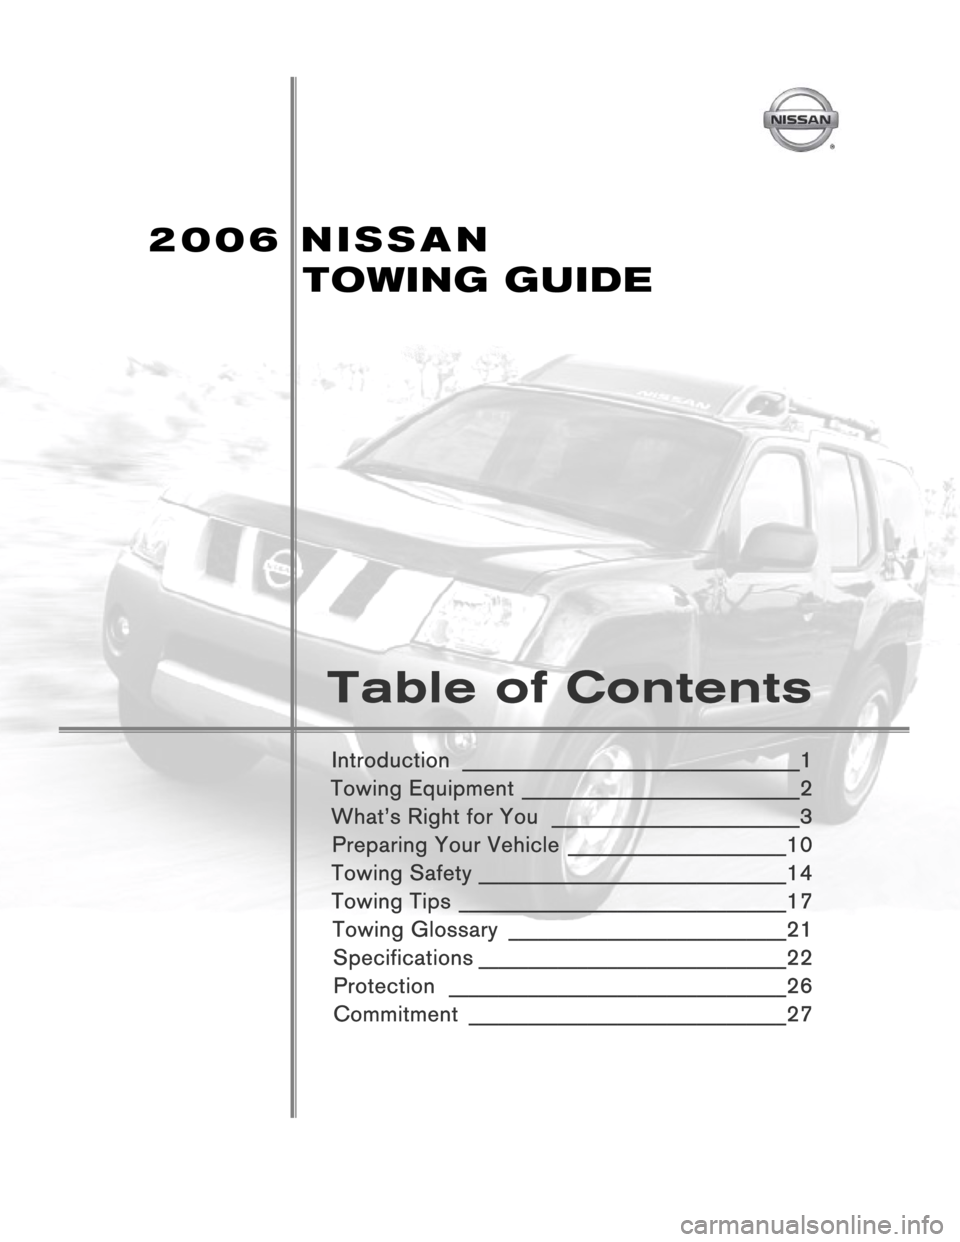 NISSAN 350Z 2006 Z33 Towing Guide  
 
 
 
 
 
 
 
 
 
 
 
 
 
 
 
 
 
 
 
 
 
Table of Contents 
 
Introduction __________________________________1 
Towing Equipment
 ____________________________2 
What’s Right for You
 ____________